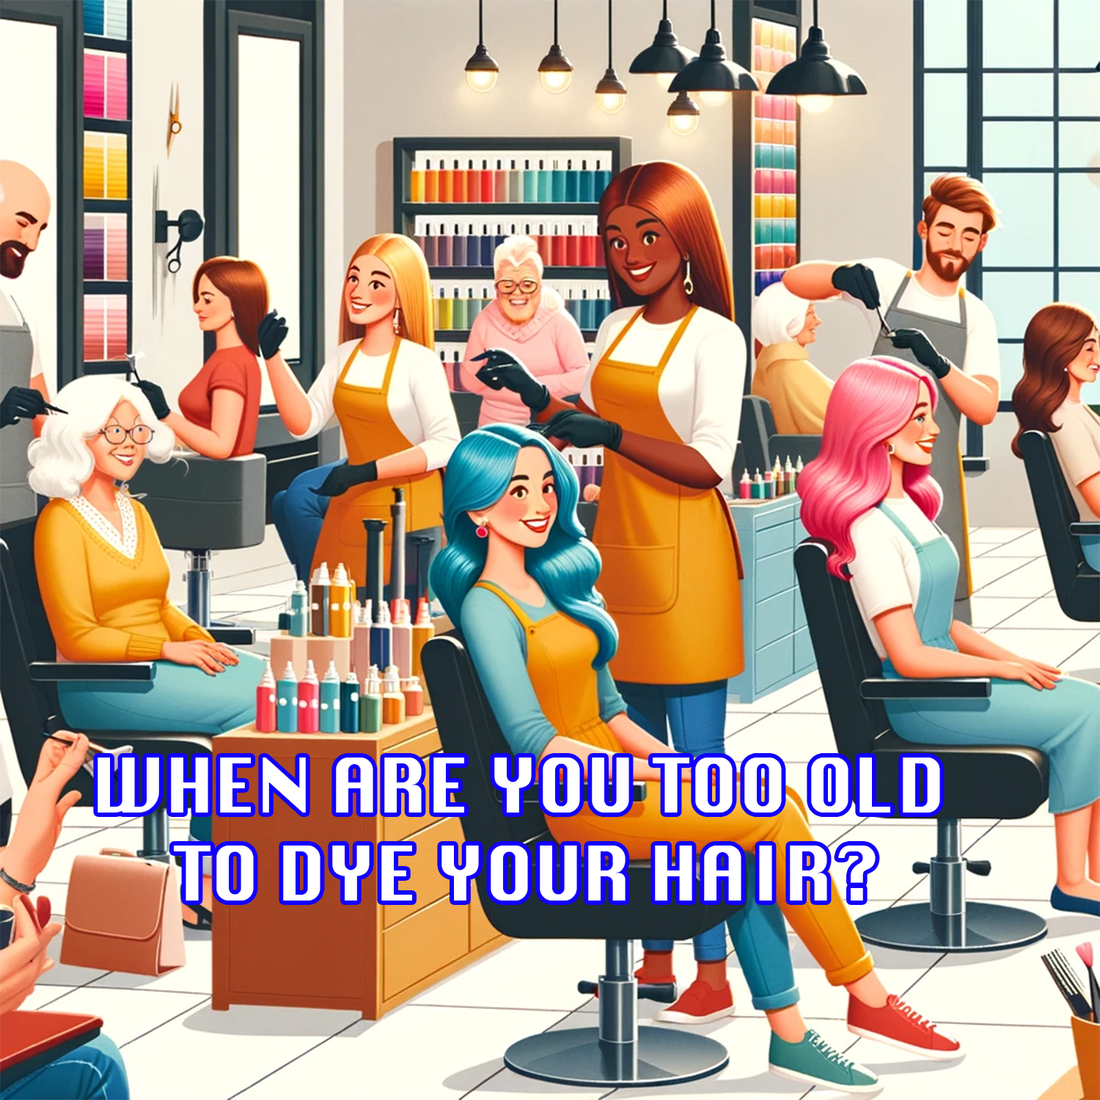 When Are You Too Old To Dye Your Hair?